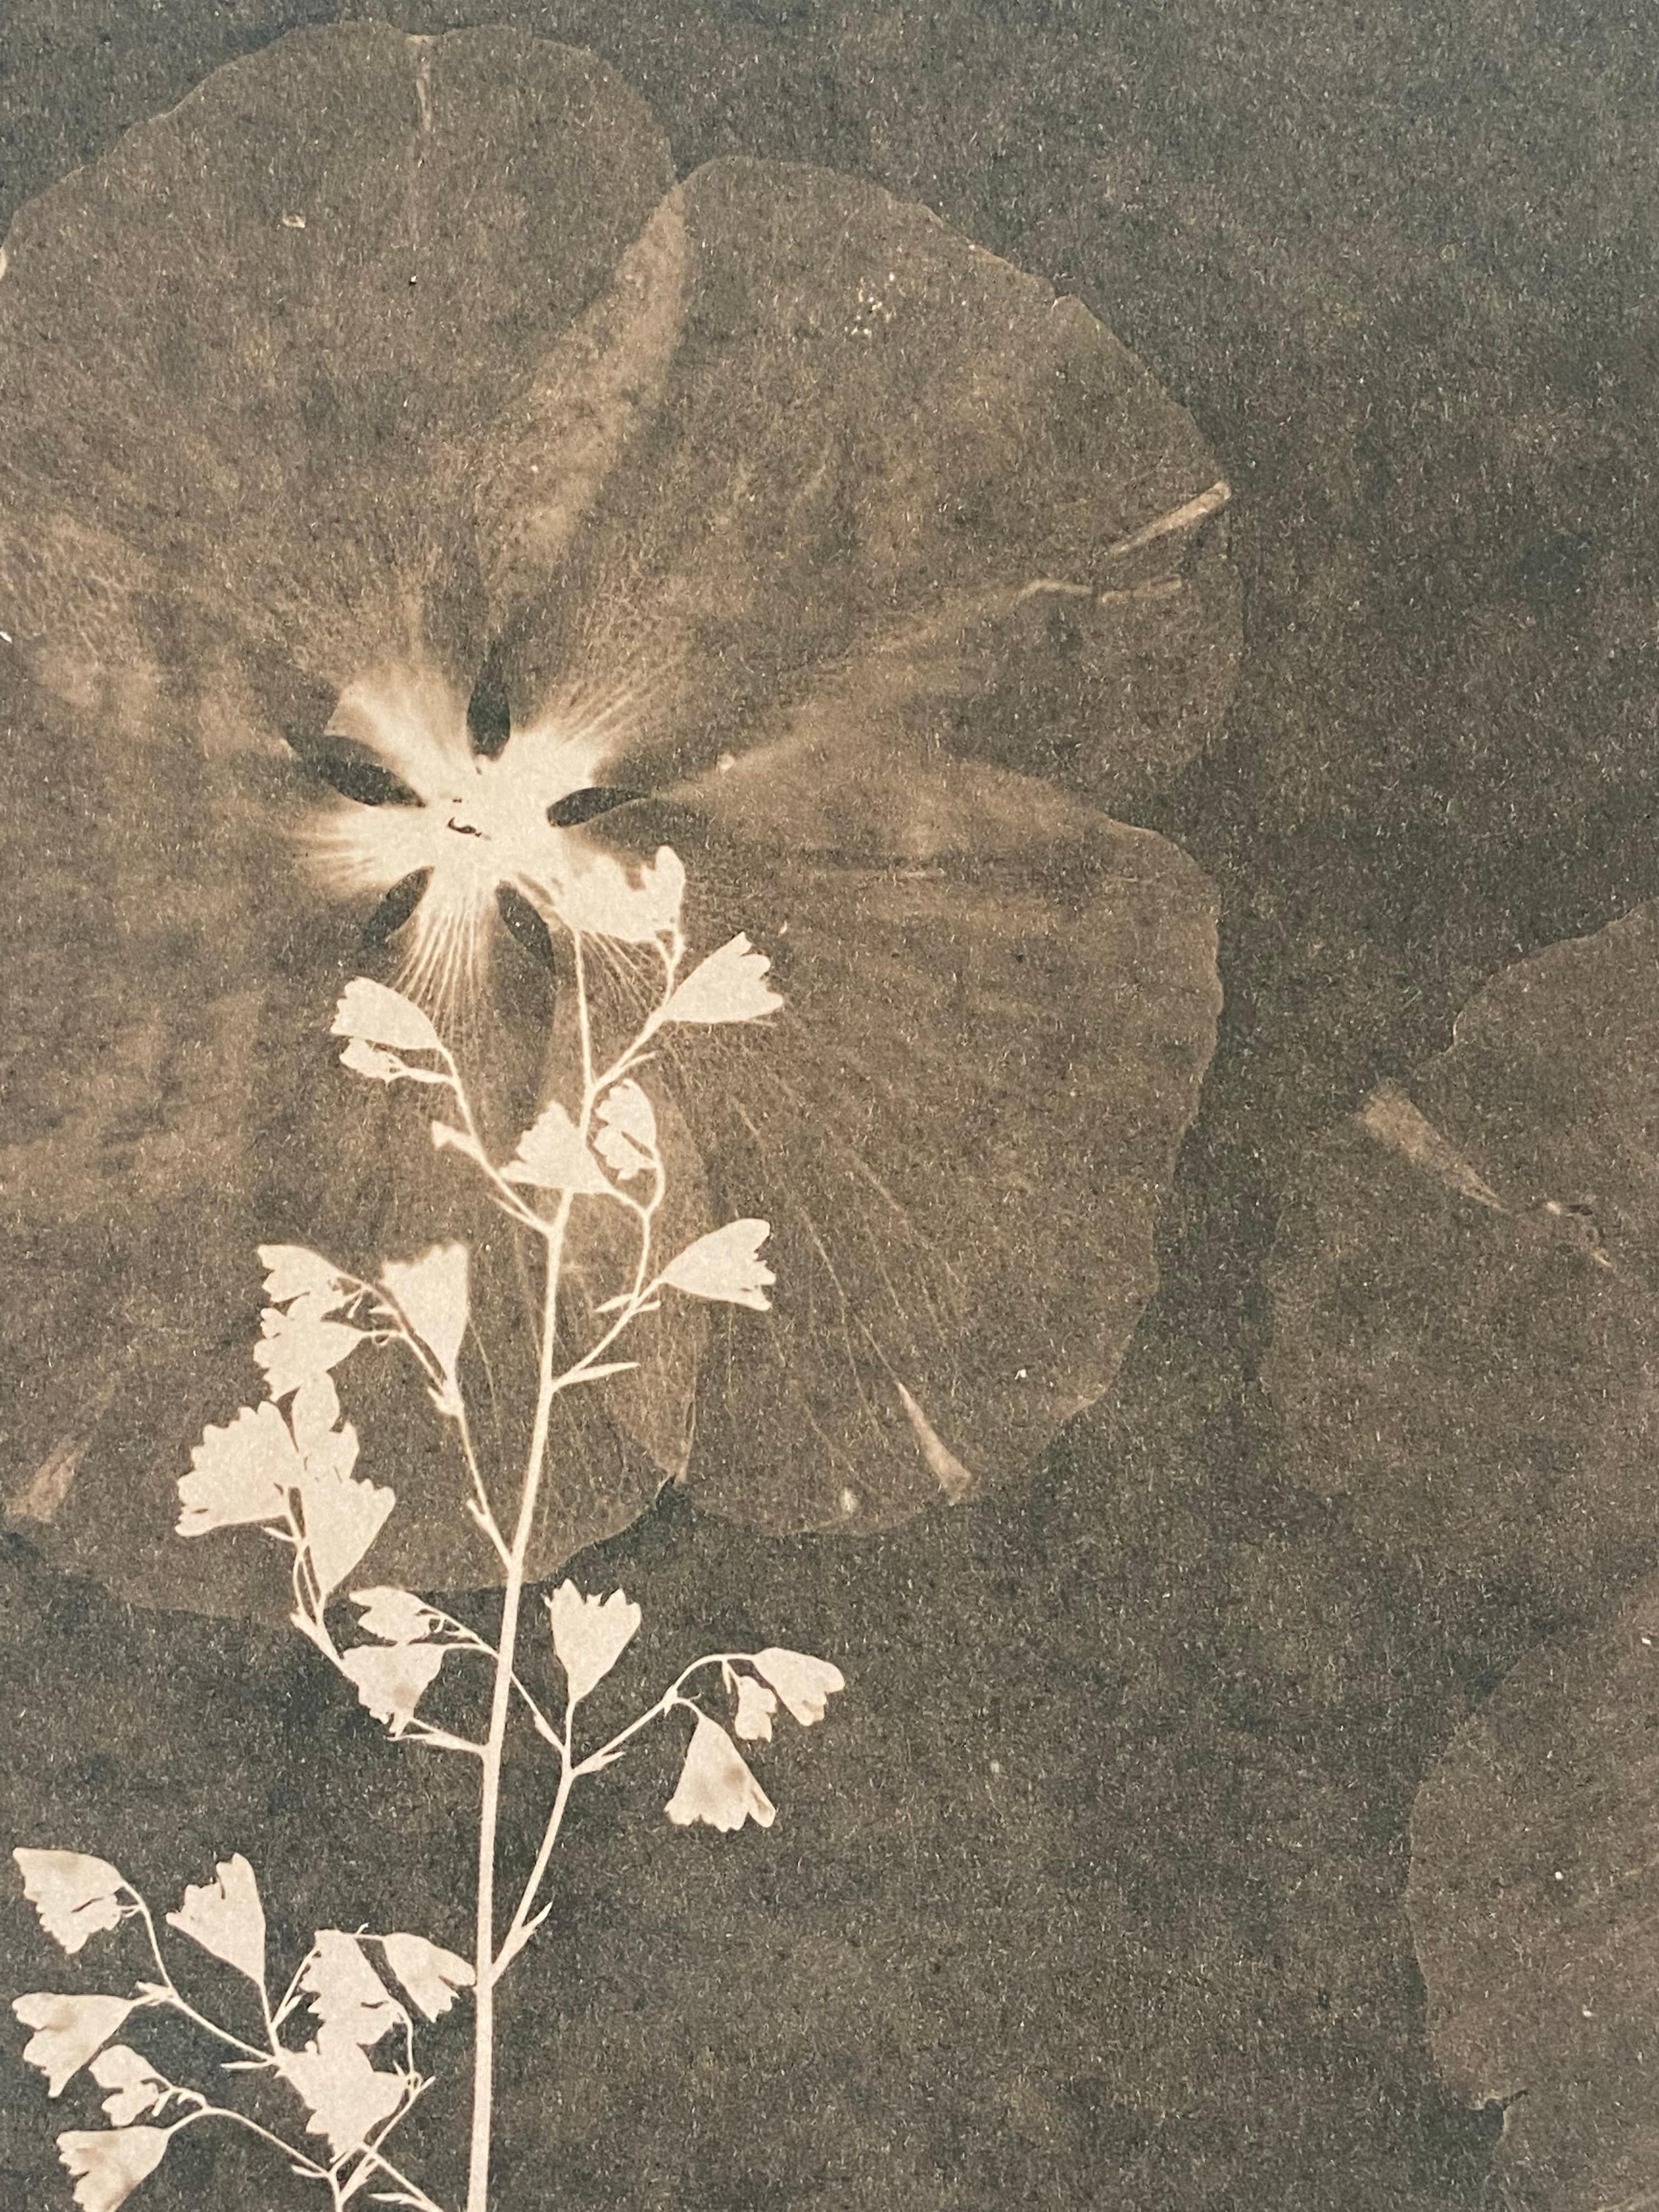 In this vertical work in watercolor, gouache, and tea toned cyanotype on hot press watercolor paper, a cyanotype print impression of botany, including orchids, Rose of Sharon and wildflowers, are depicted in a luminous shade of pale sienna against a